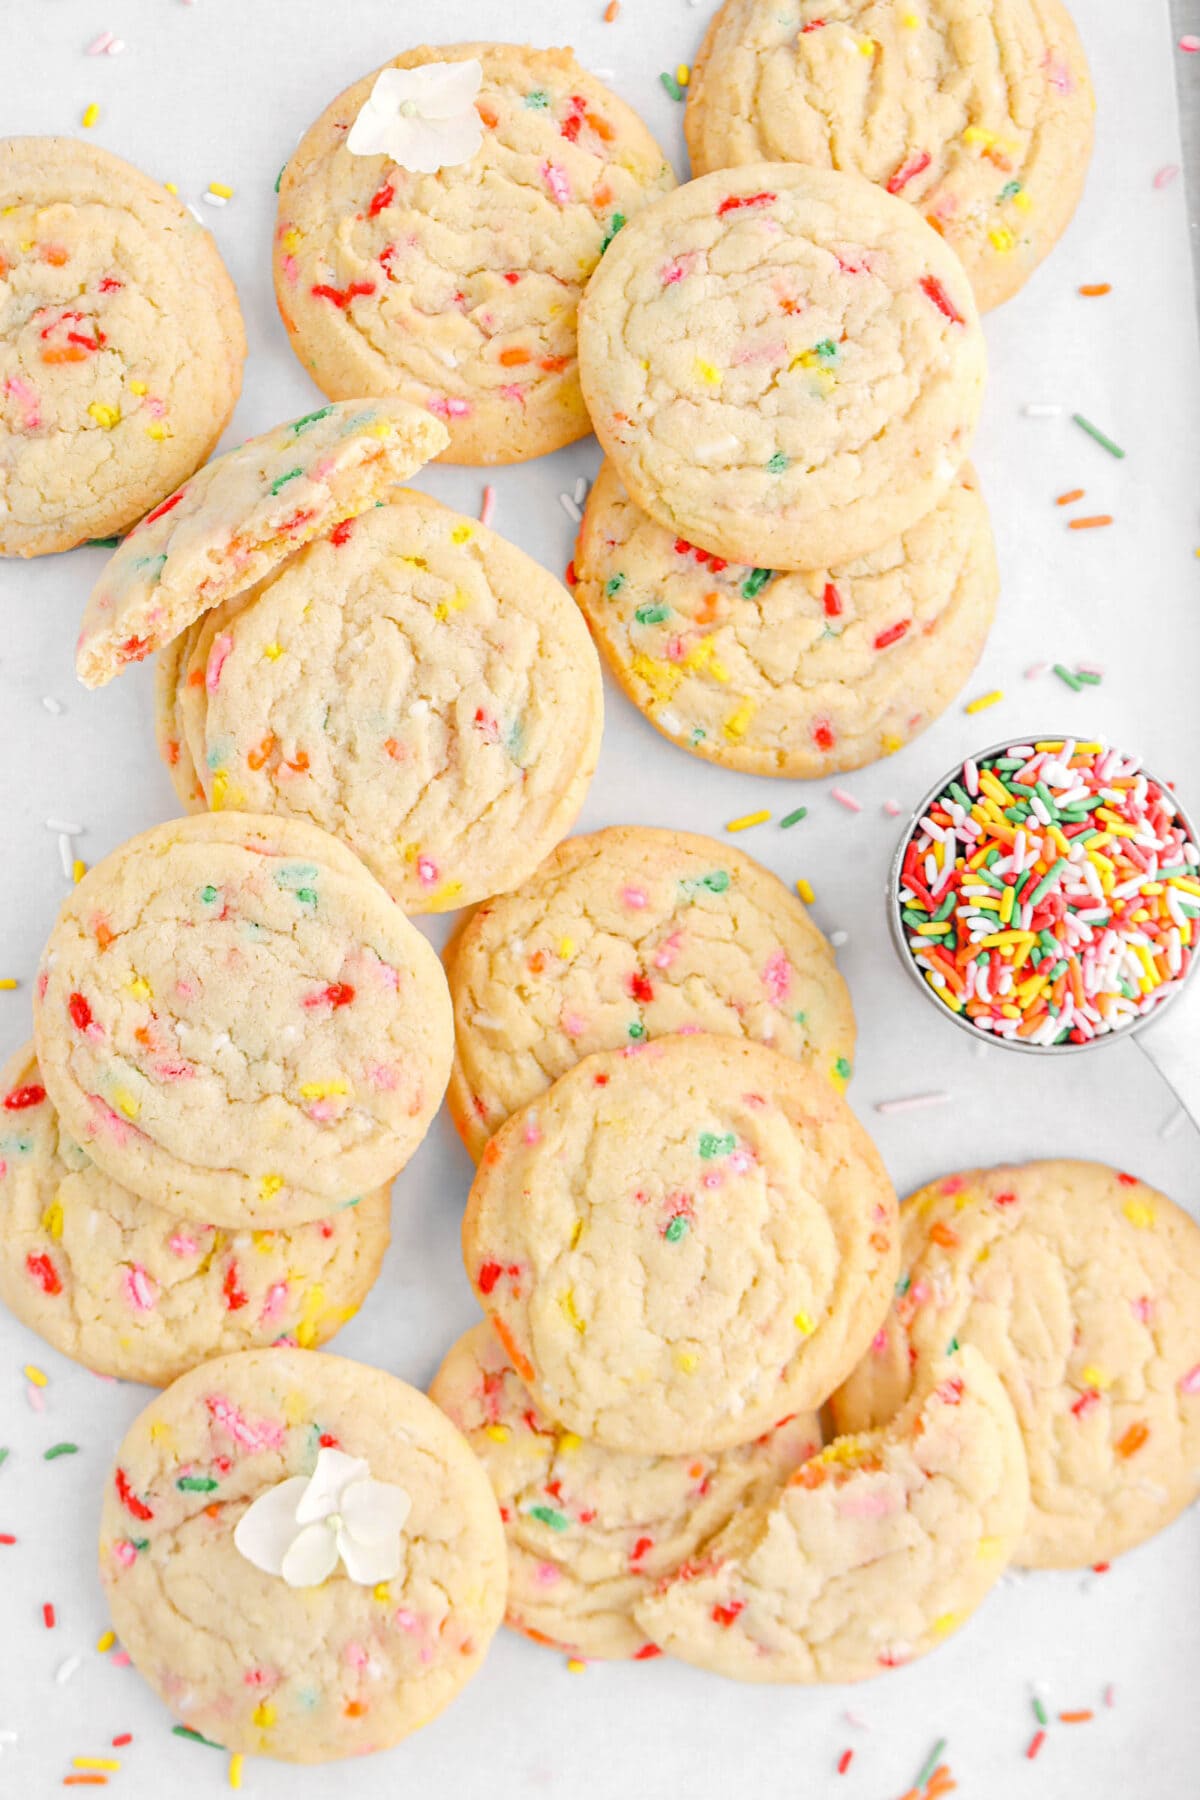 funfetti cookies piled on parchment paper with one cookie broken in half, two white hydrangea flowers, and a measuring cup of rainbow sprinkles beside